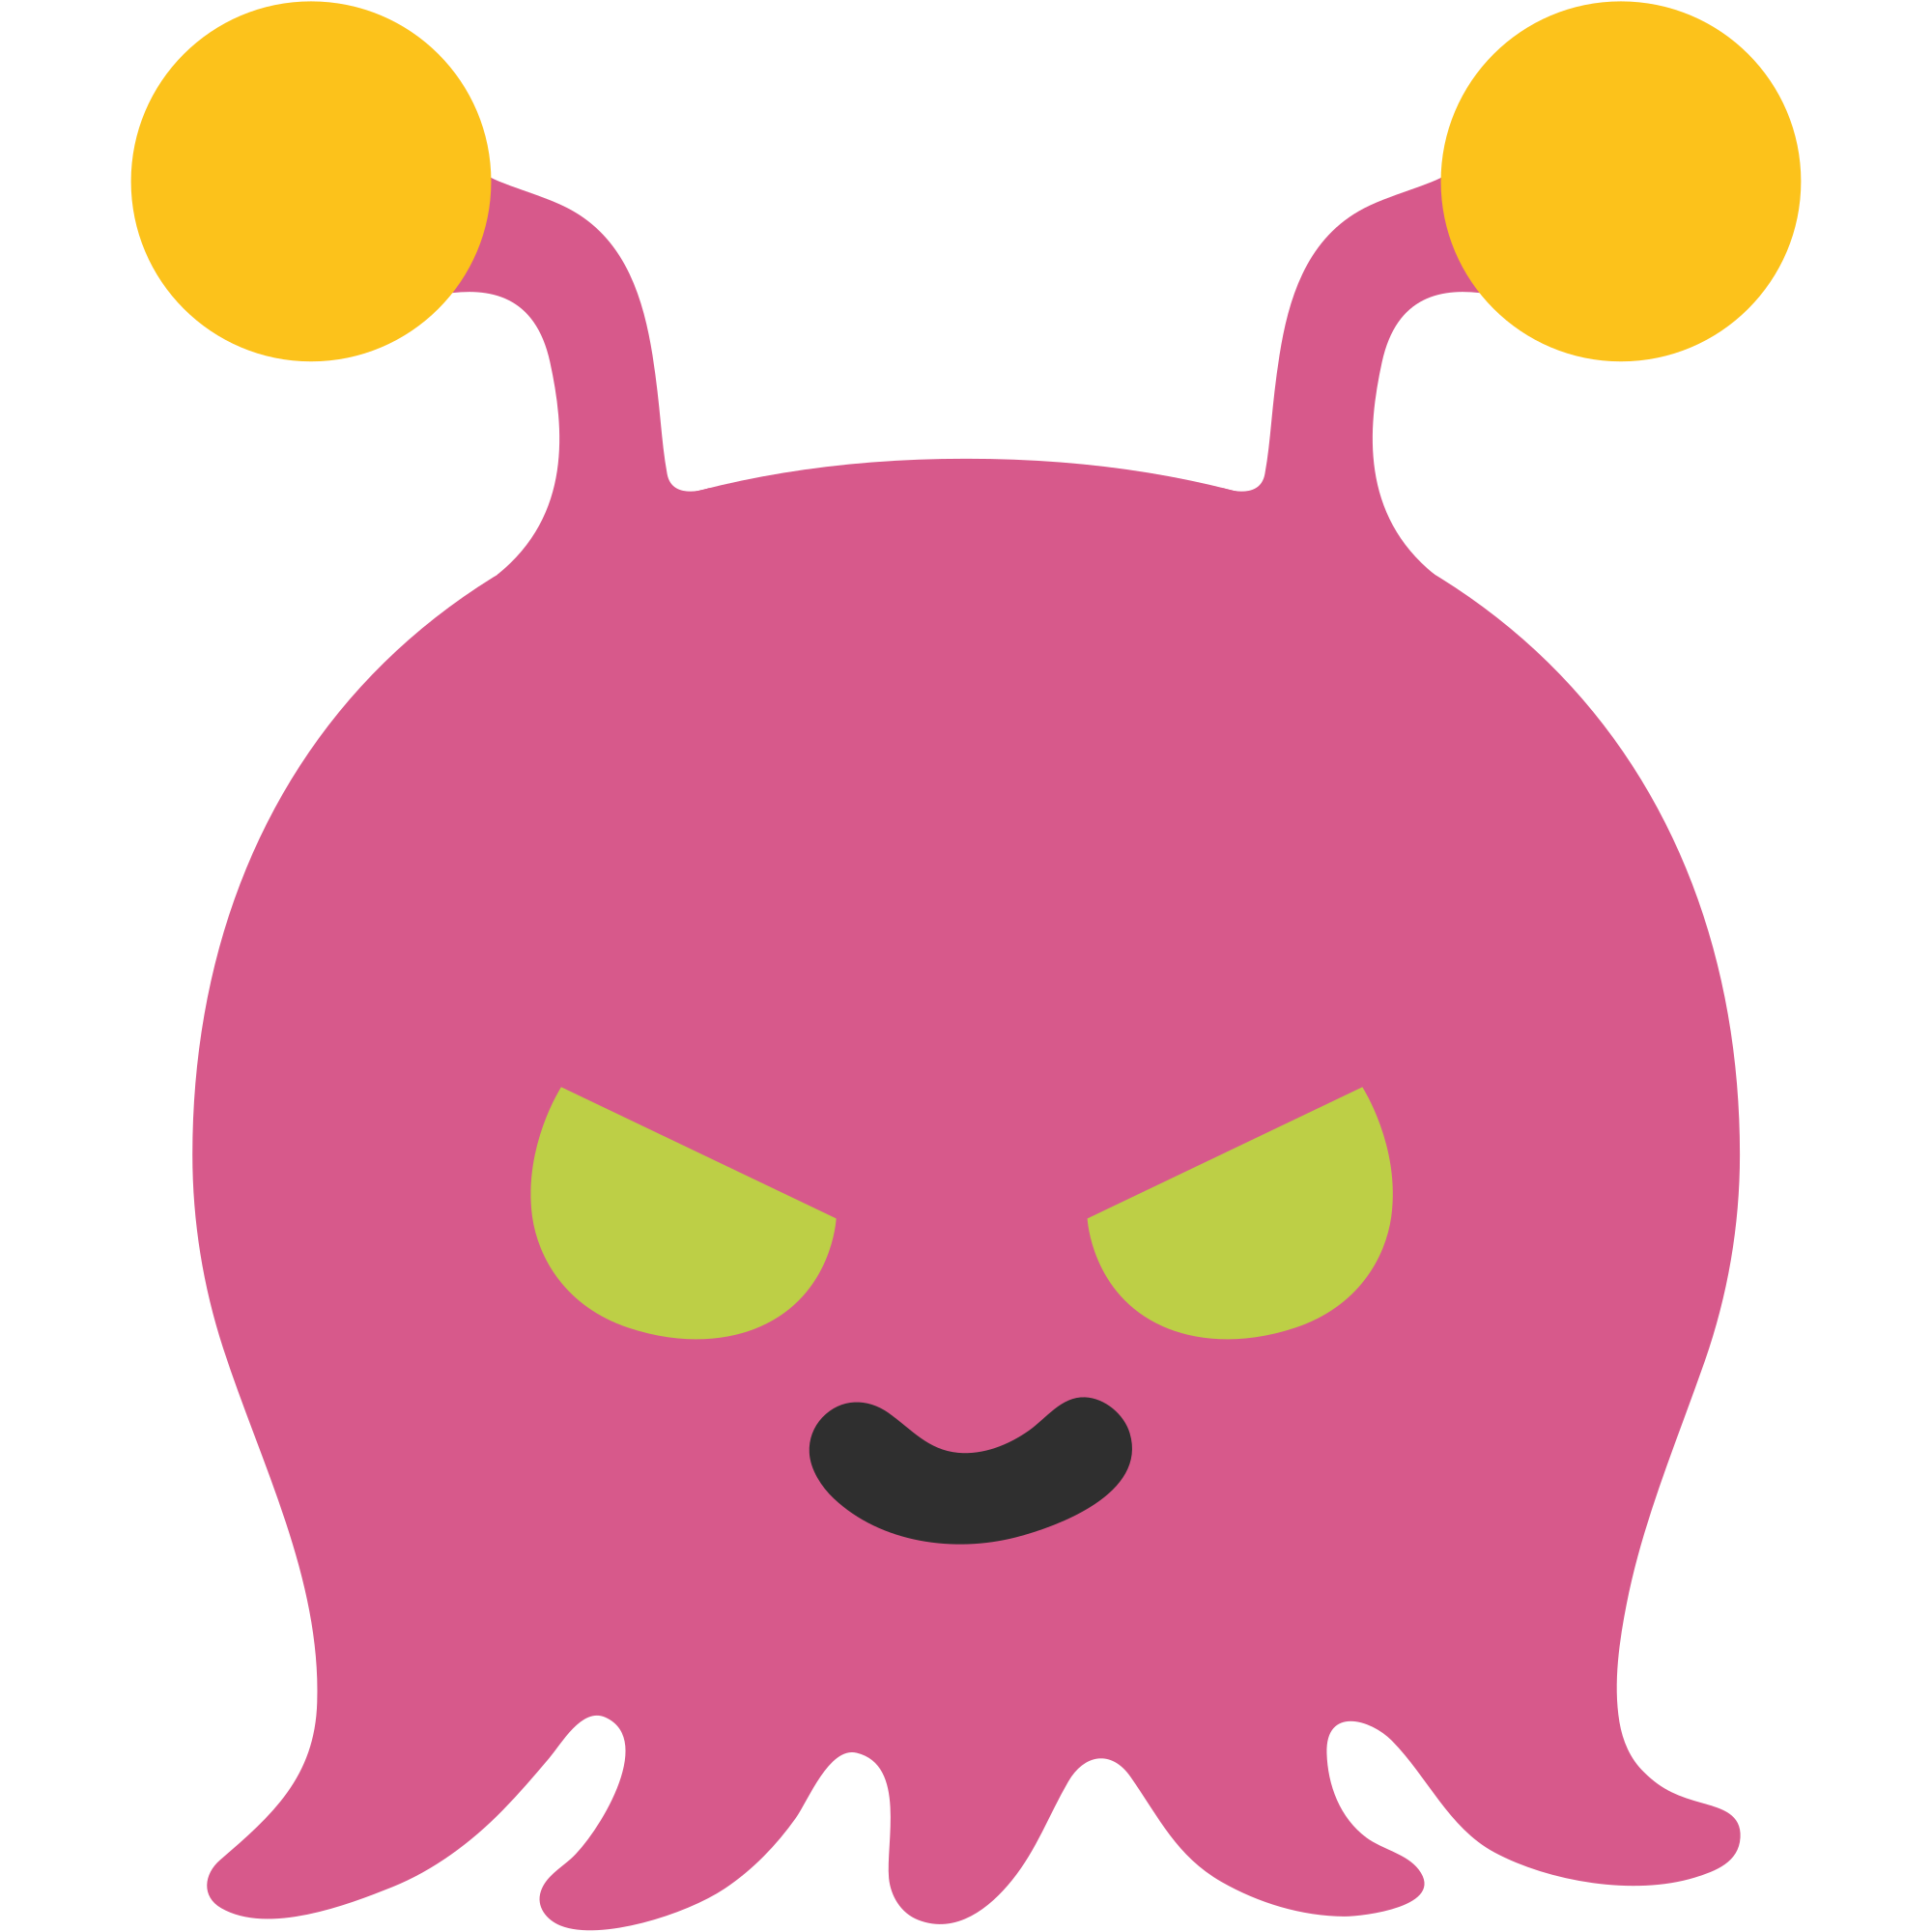 Monstro svg #8, Download drawings